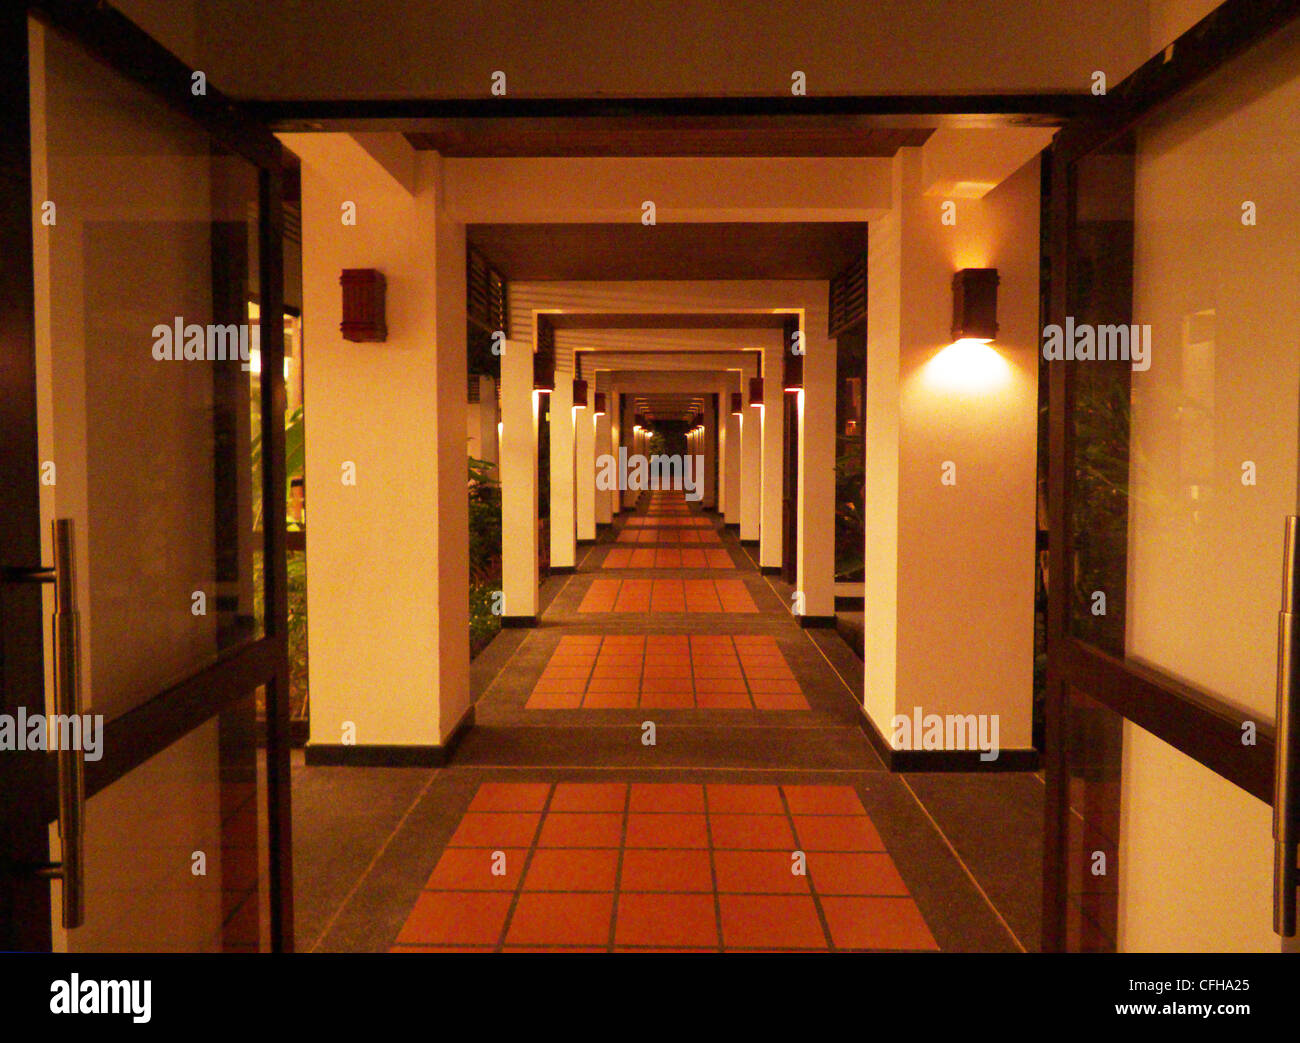 JW Marriott Hotel Khao Lak Thailand. Hotel corridor to some restaurants and kitchens, picture taken at night. Stock Photo